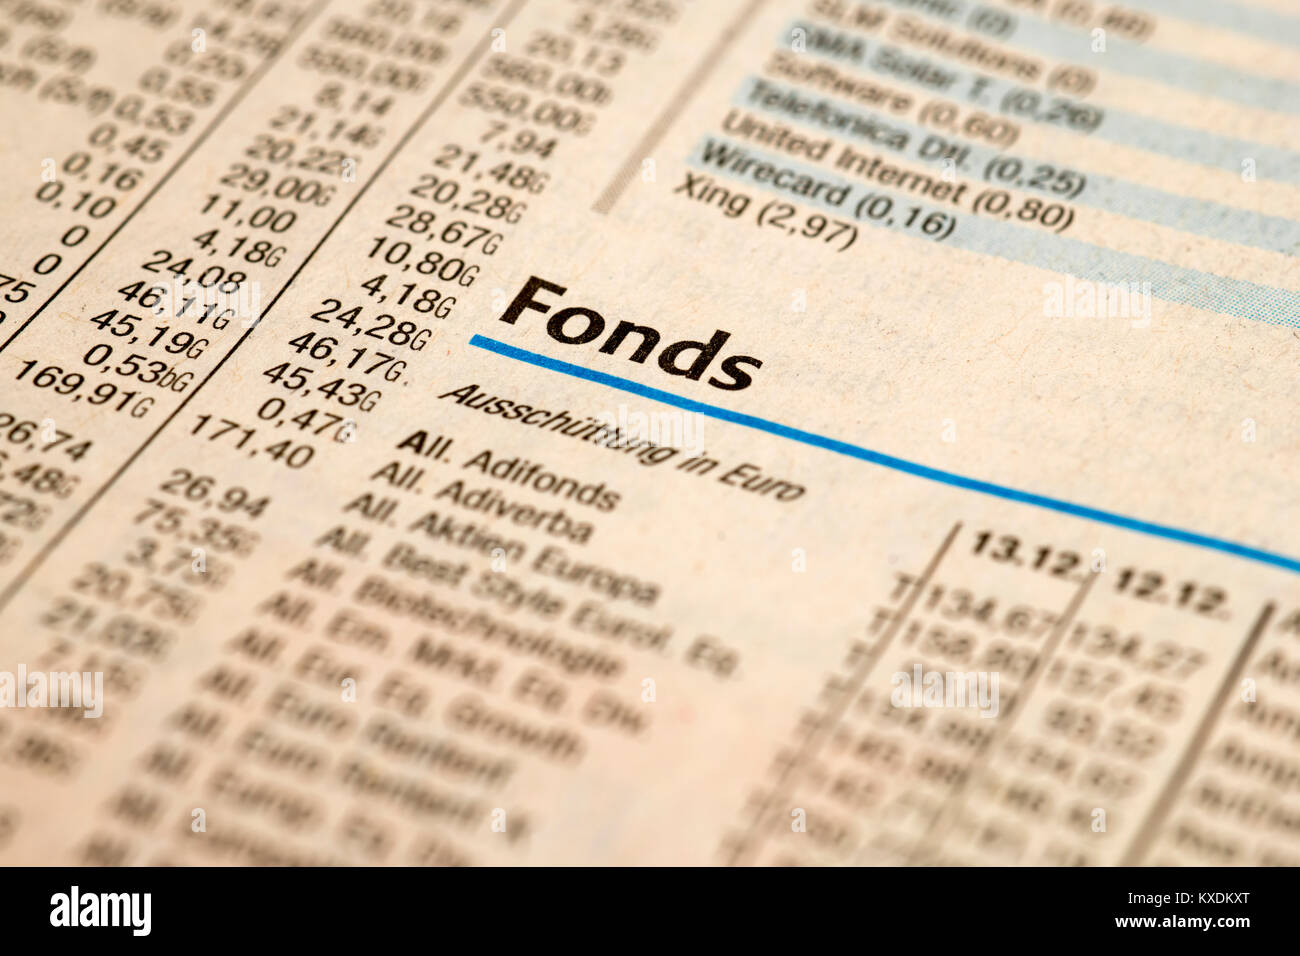 Fund, stock exchange part of a daily newspaper Stock Photo